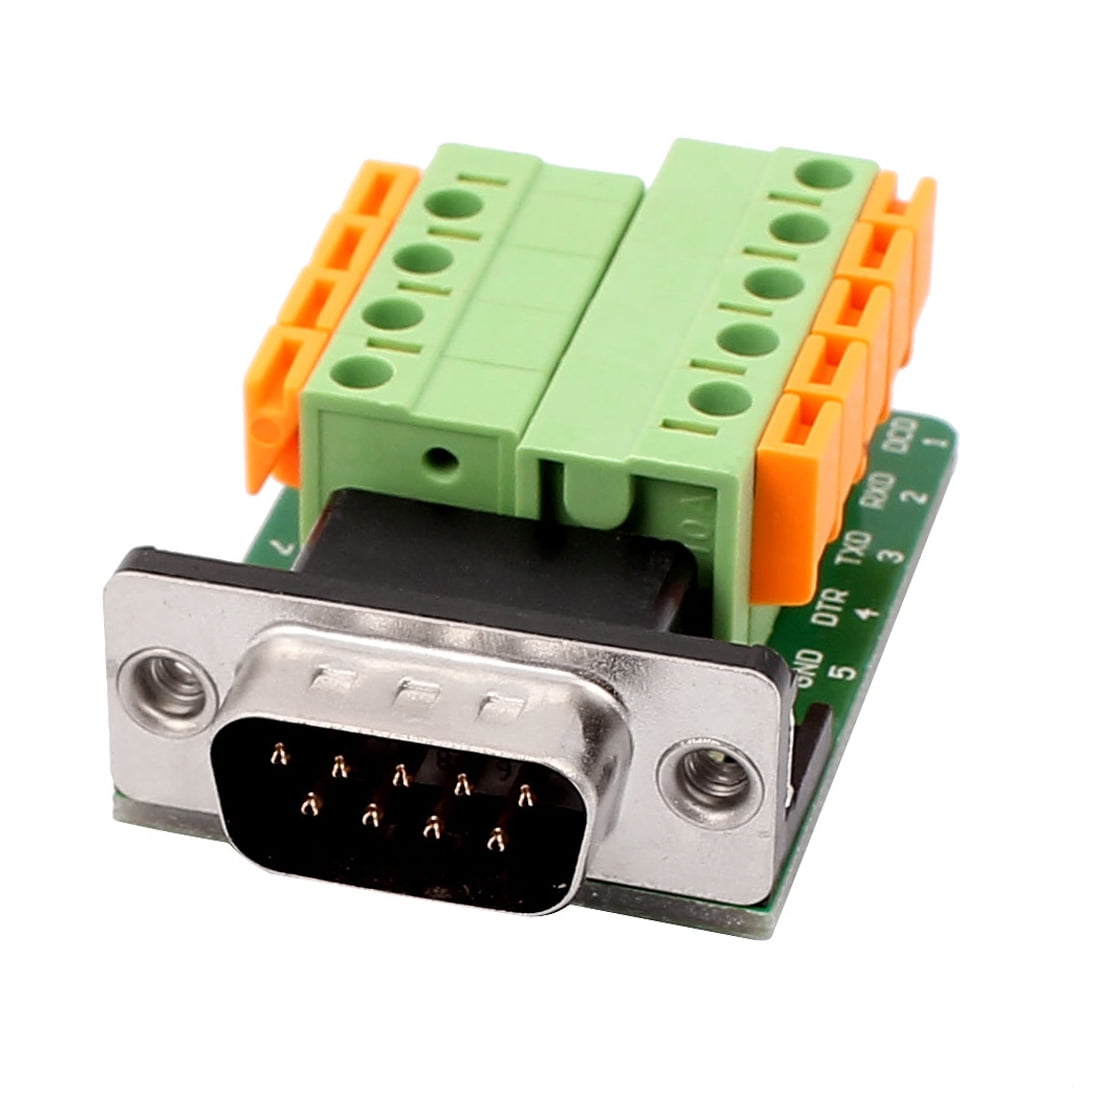 DB9 Male Signals Breakout Board Screw terminal connector Serial Port 